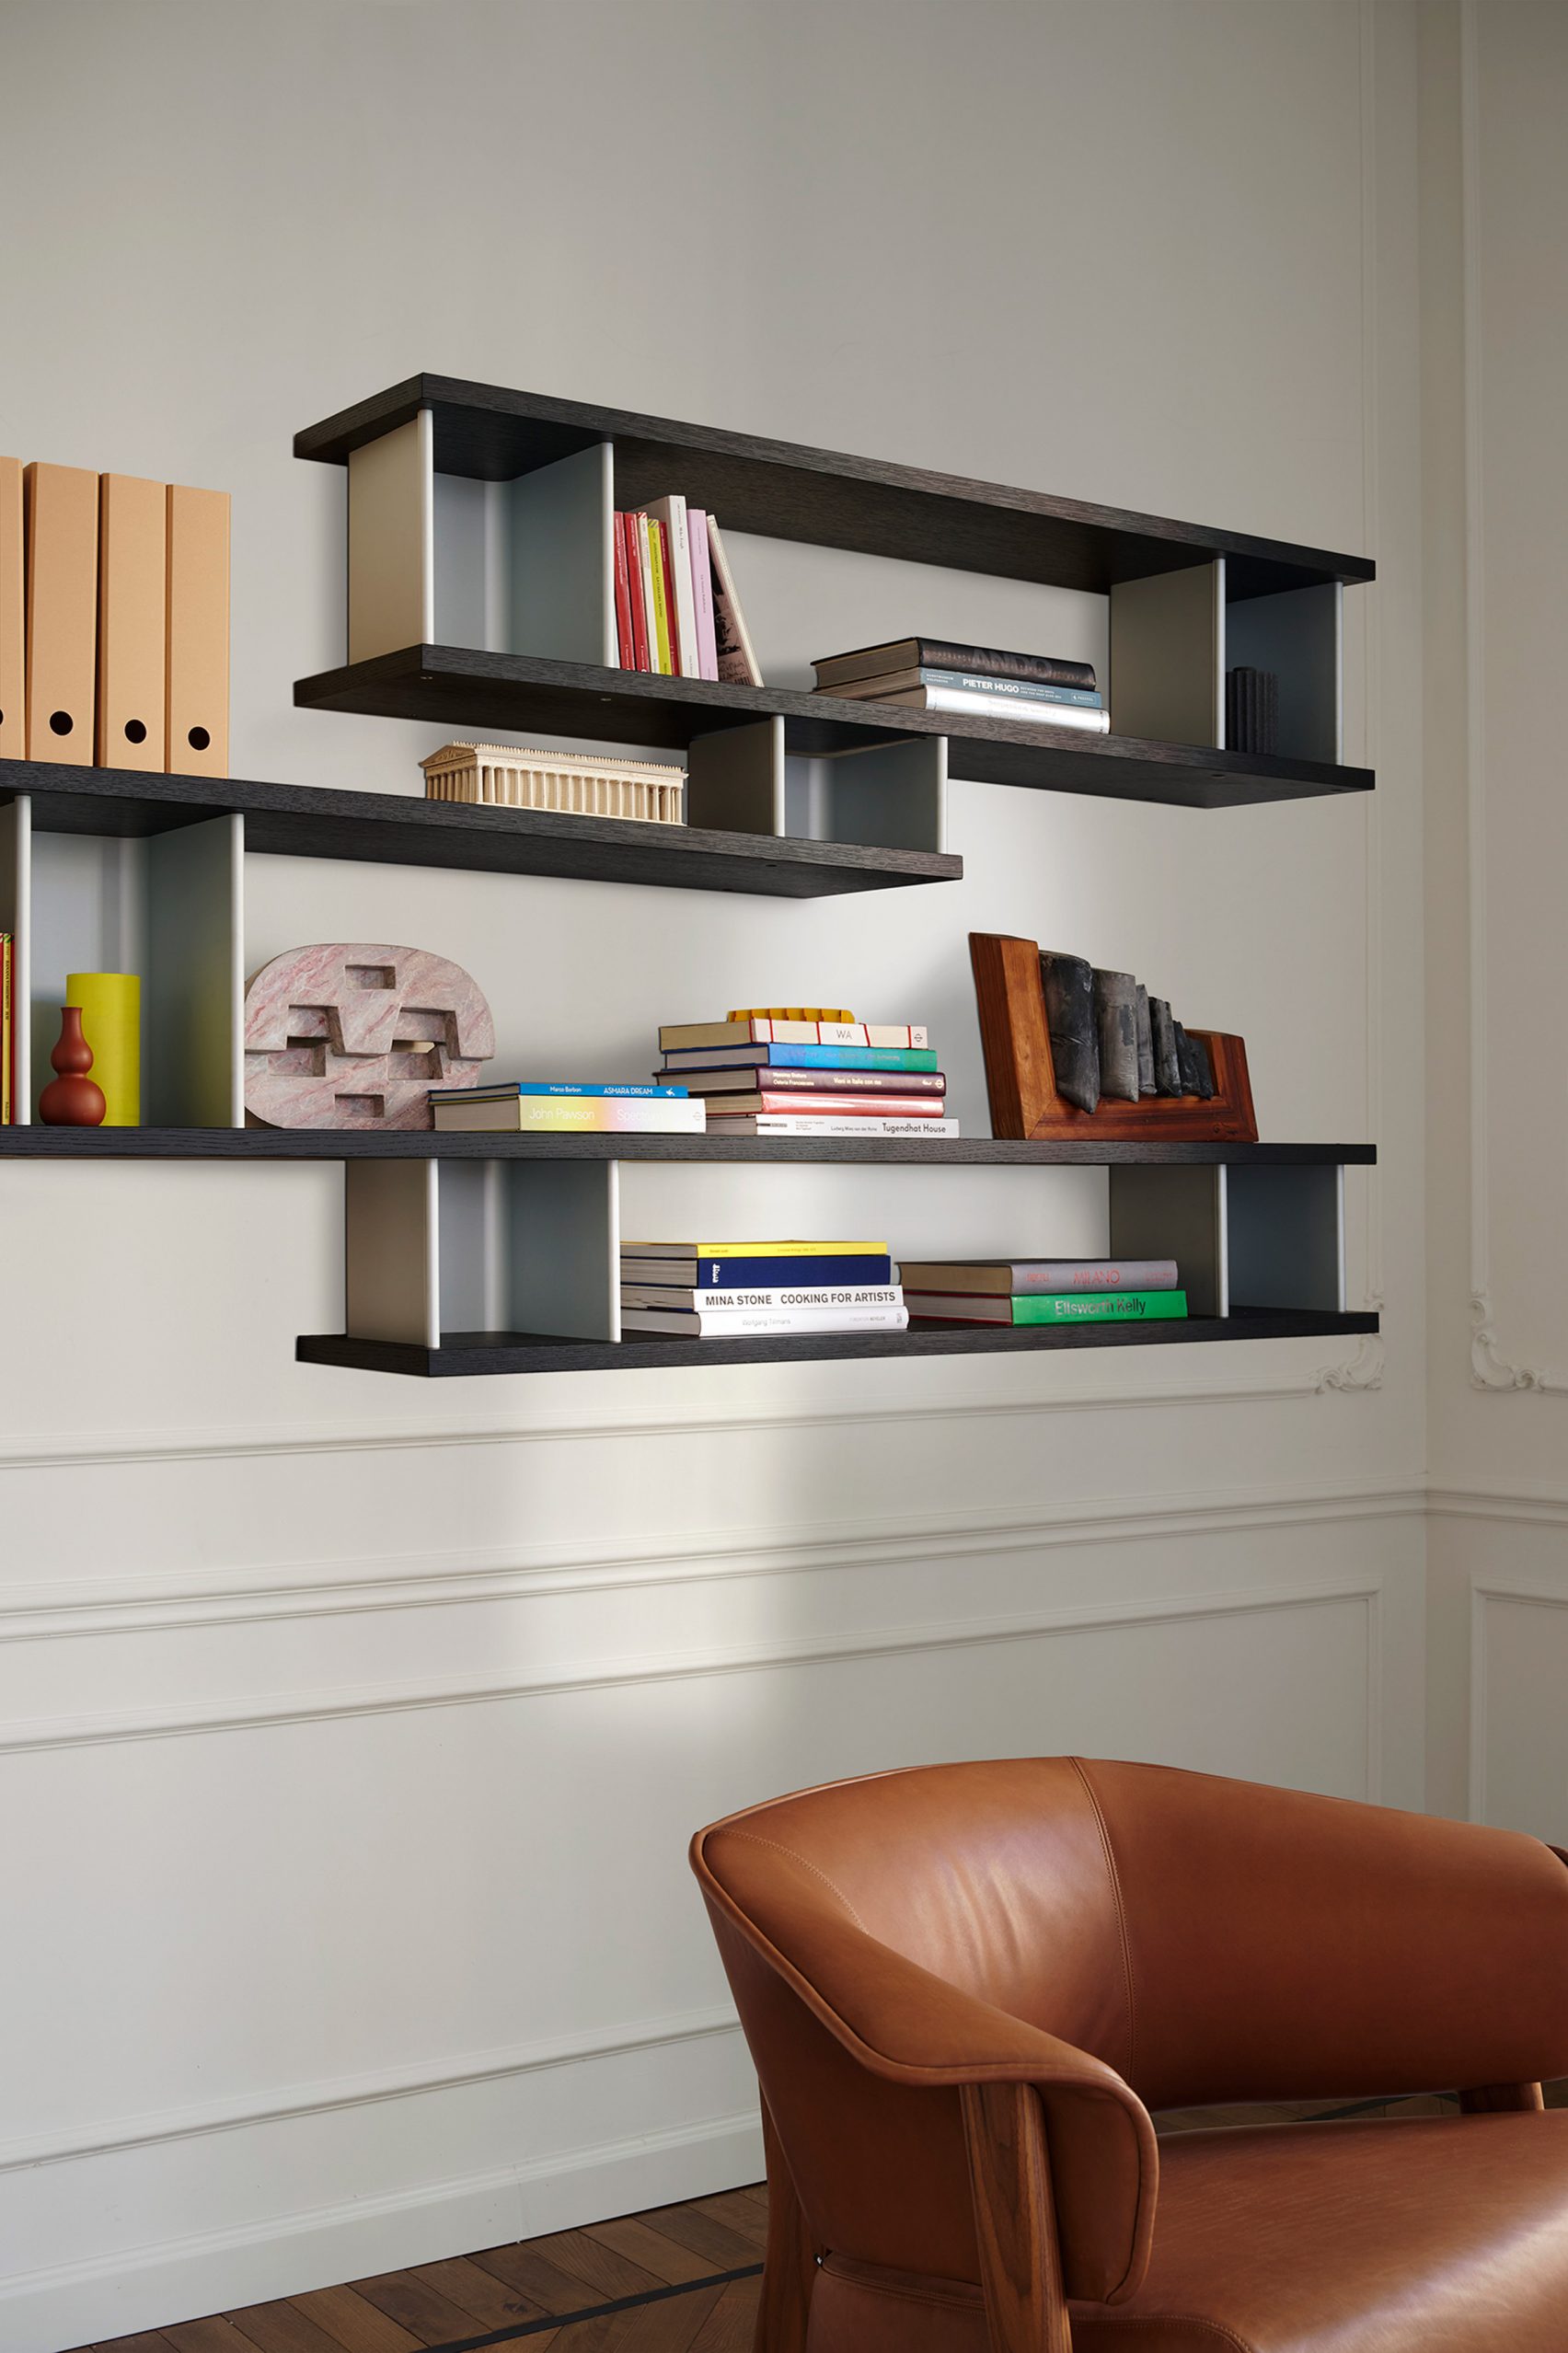 A photograph of the wall-mounted shelf system 